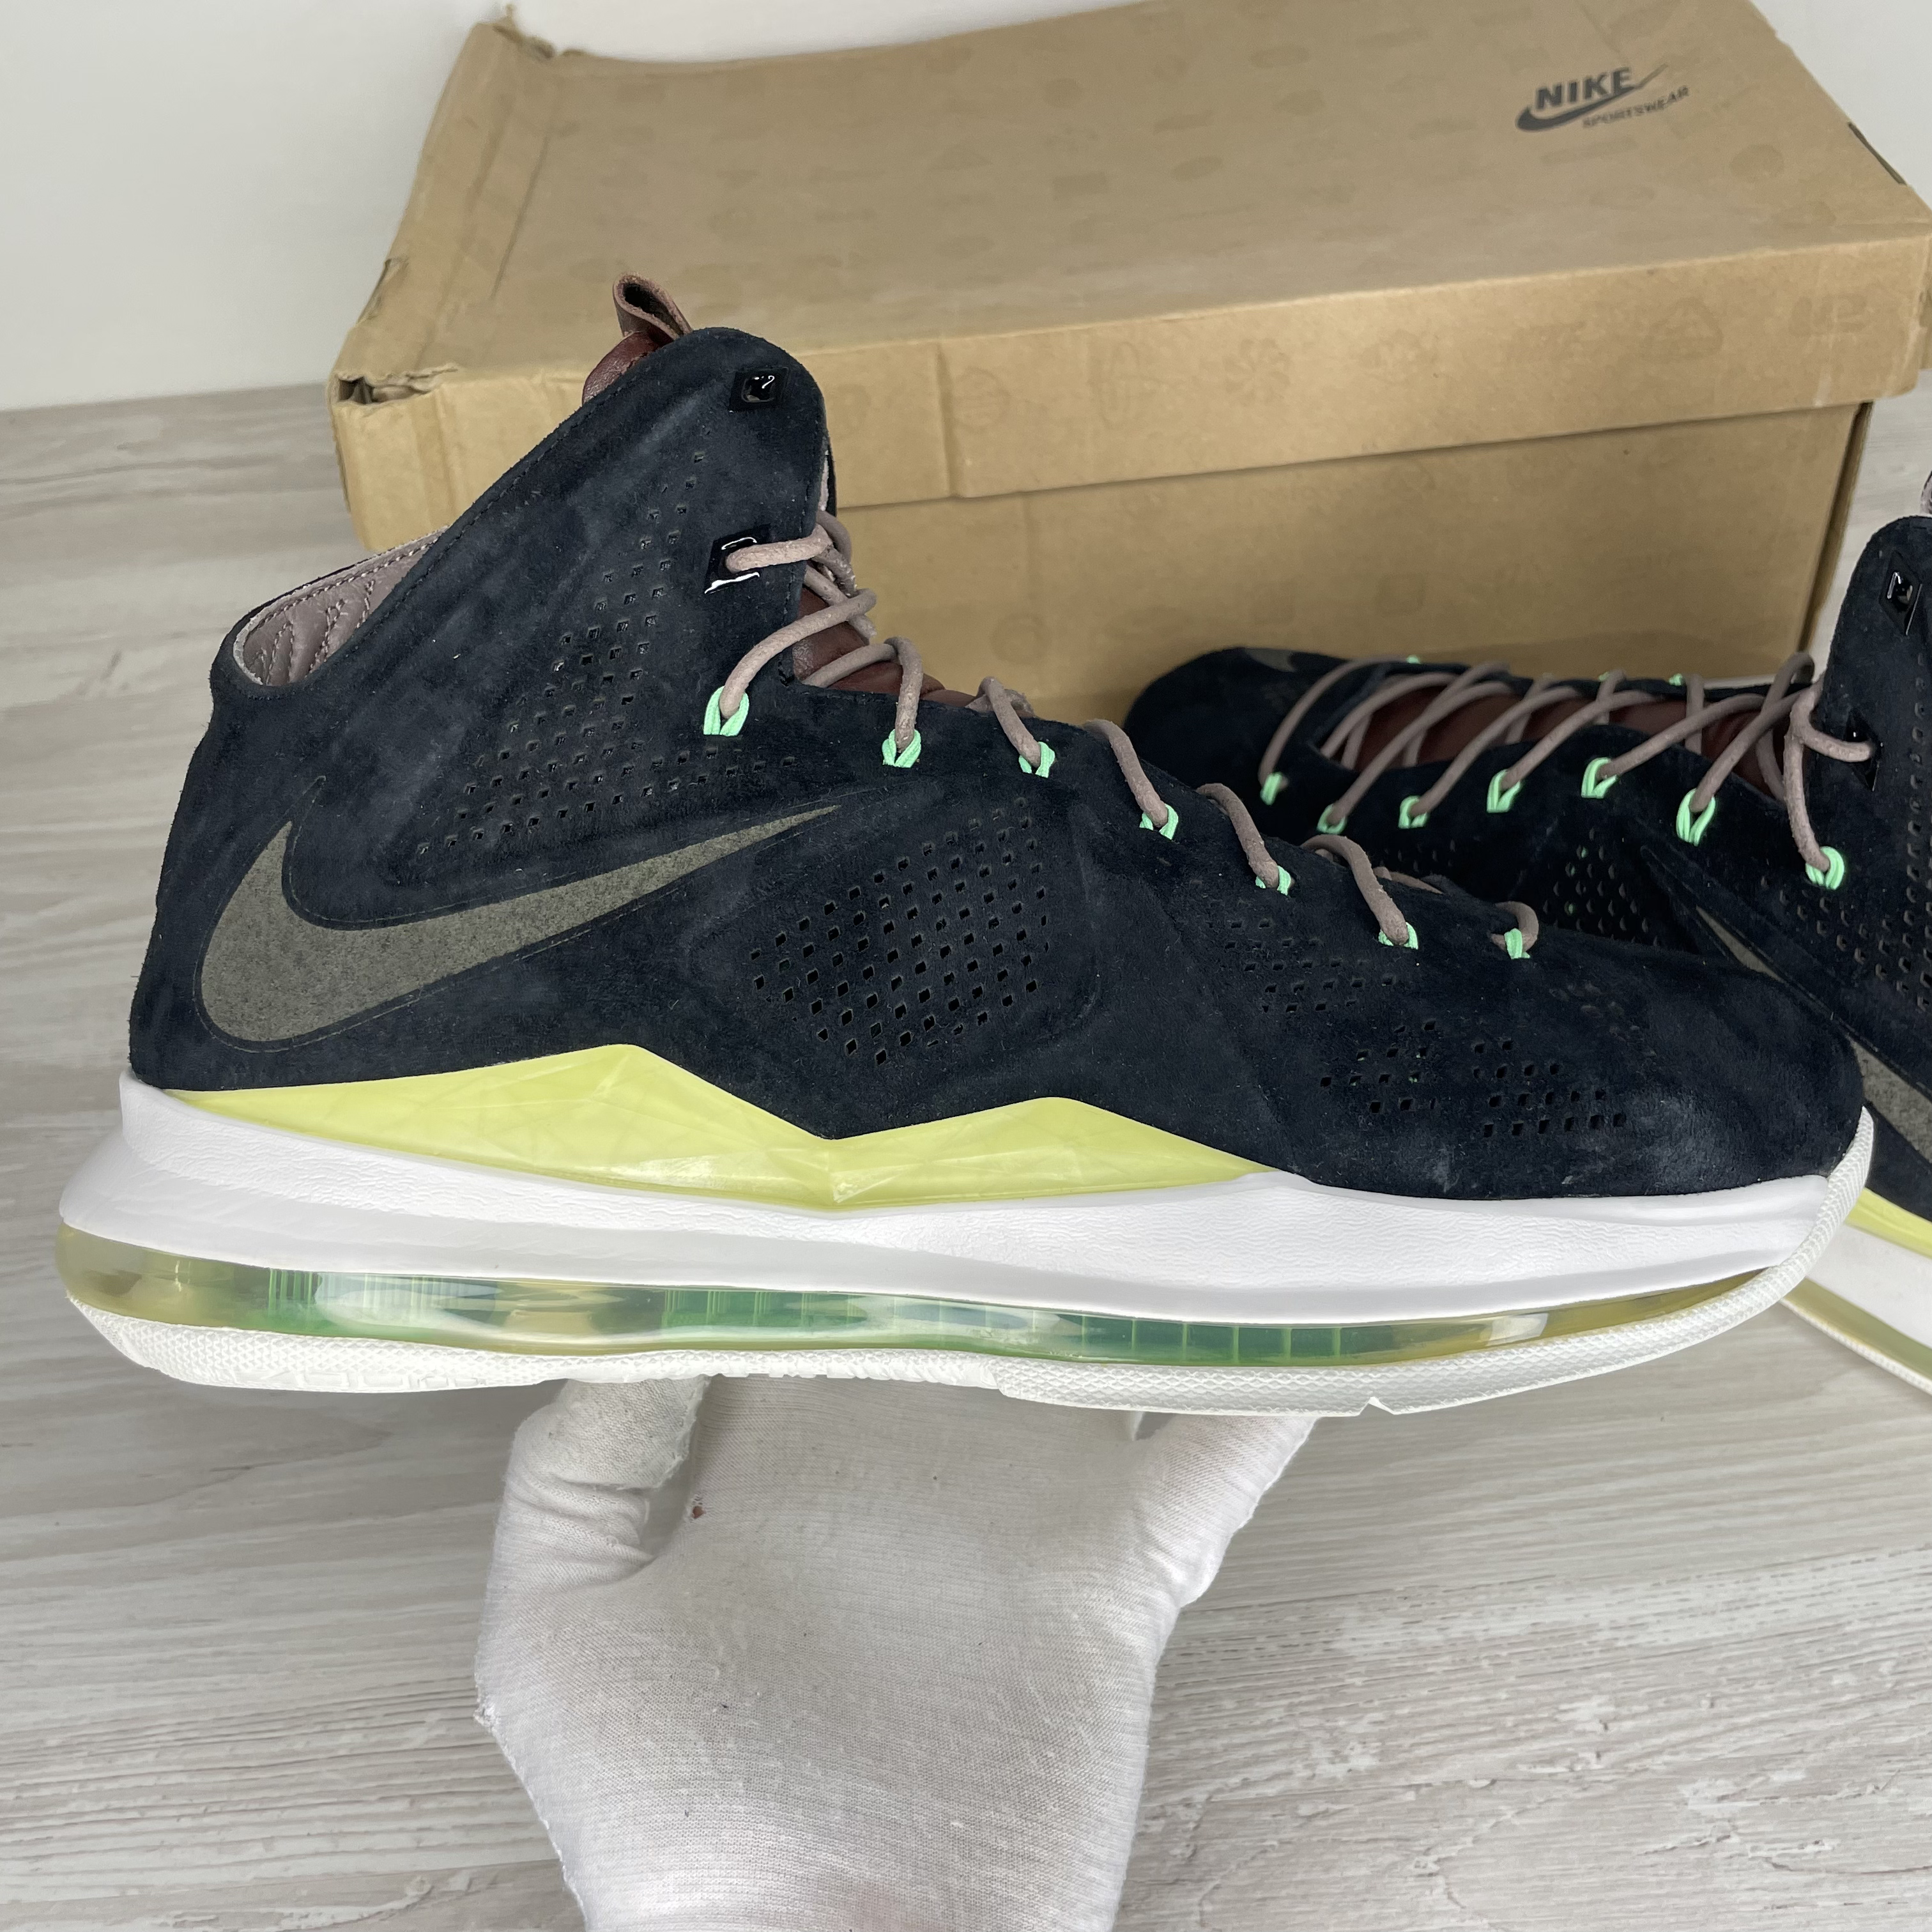 Nike Sneakers, LeBron X EXT 'Black Suede' (44)